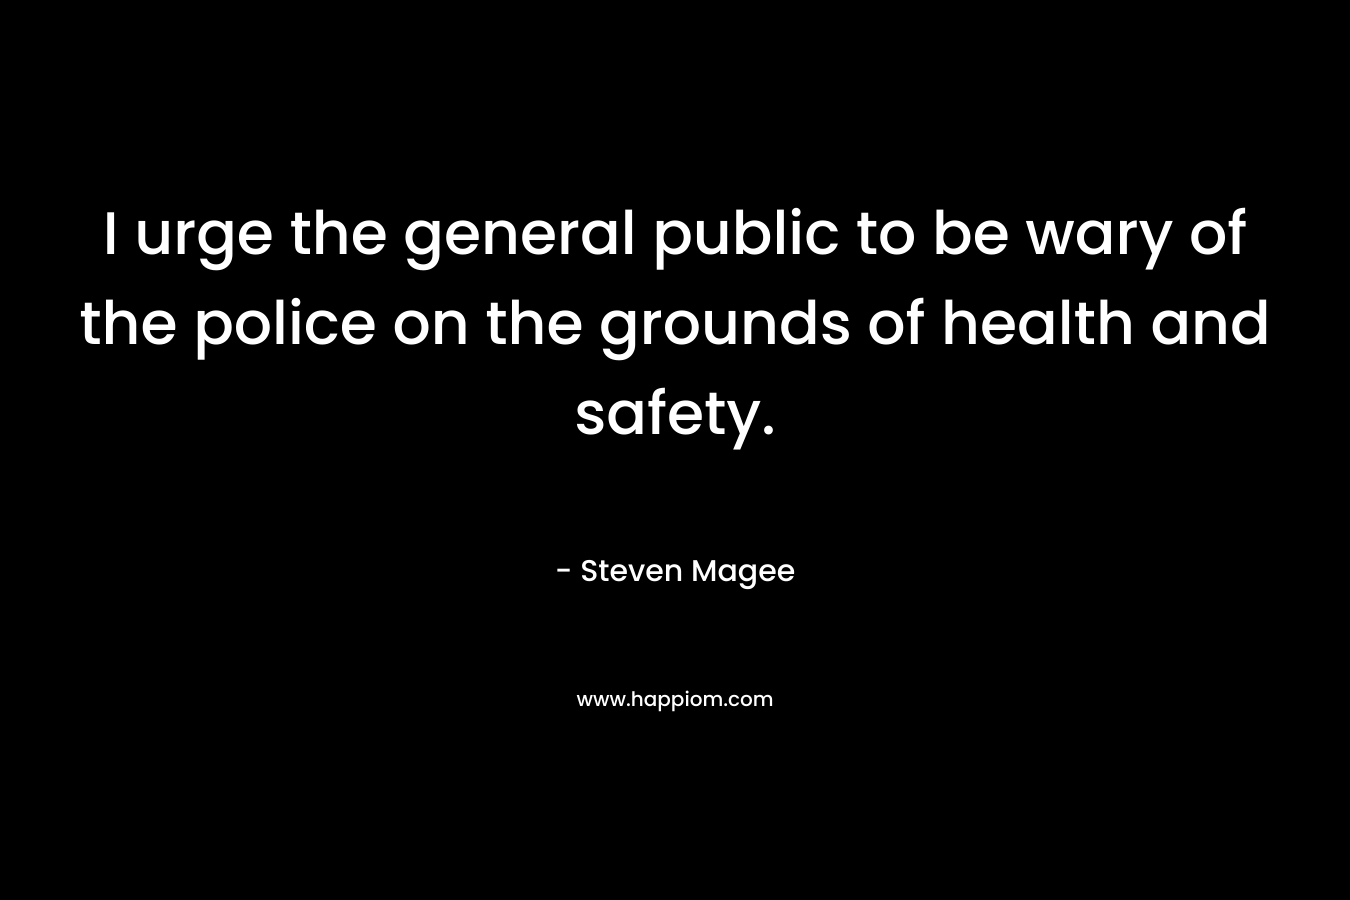 I urge the general public to be wary of the police on the grounds of health and safety.